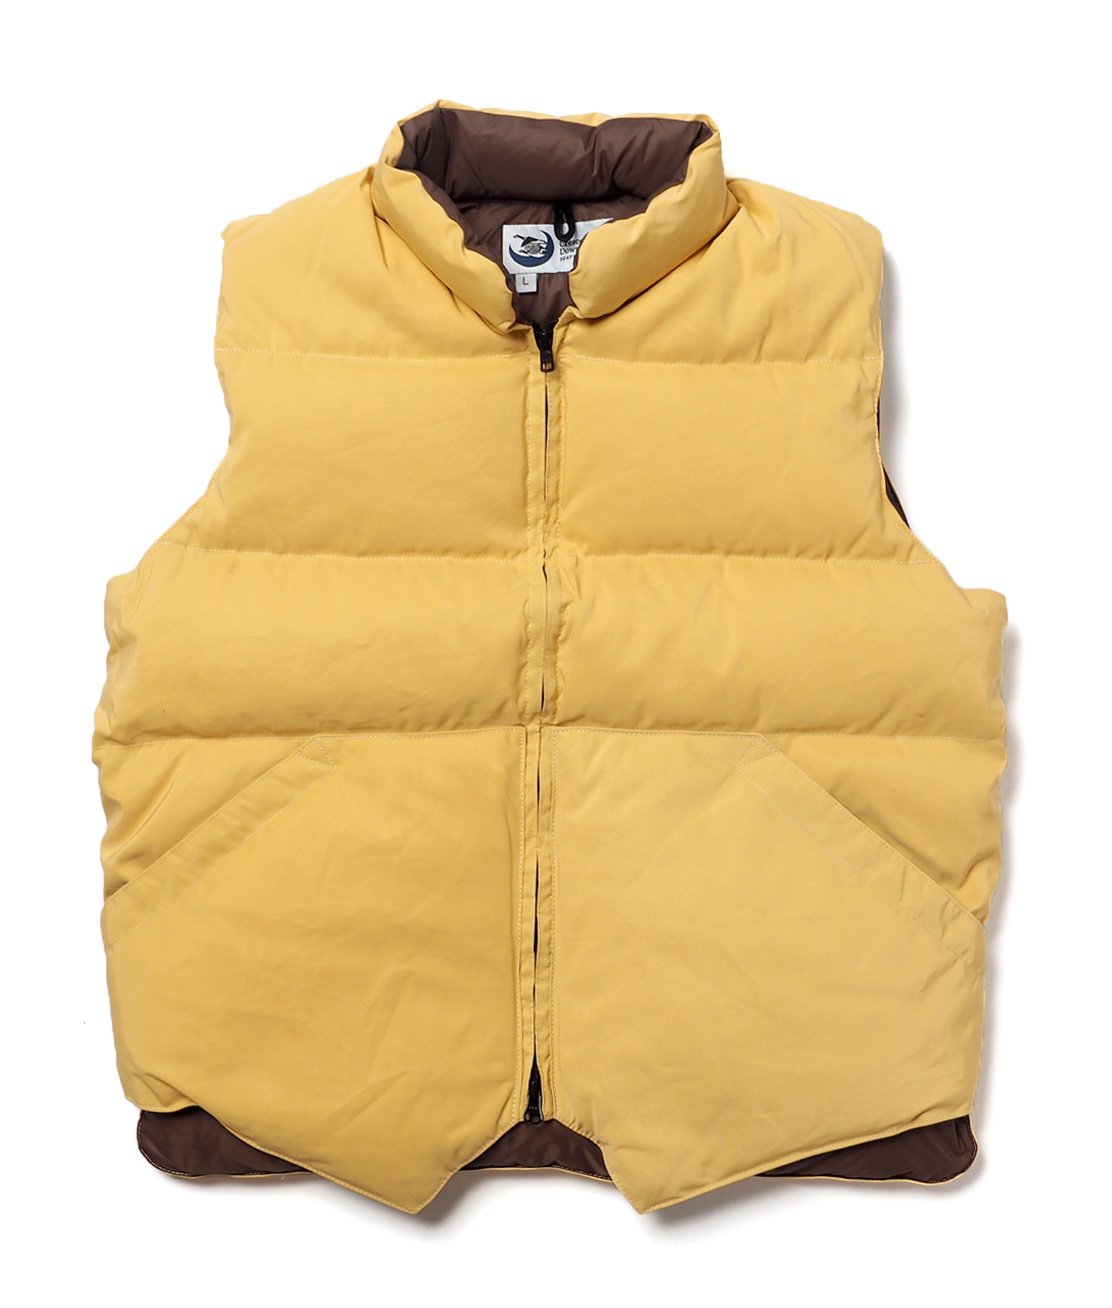 【Crescent Down Works】NORTH BY NORTH WEST VEST - BUTTER/BROWN ダウンベスト アメリカ製 -  HUNKY DORY | LEVI'S VINTAGE CLOTHING、JACKMAN、CHAMPIONなどのブランドを主に扱うセレクトショップ  ...